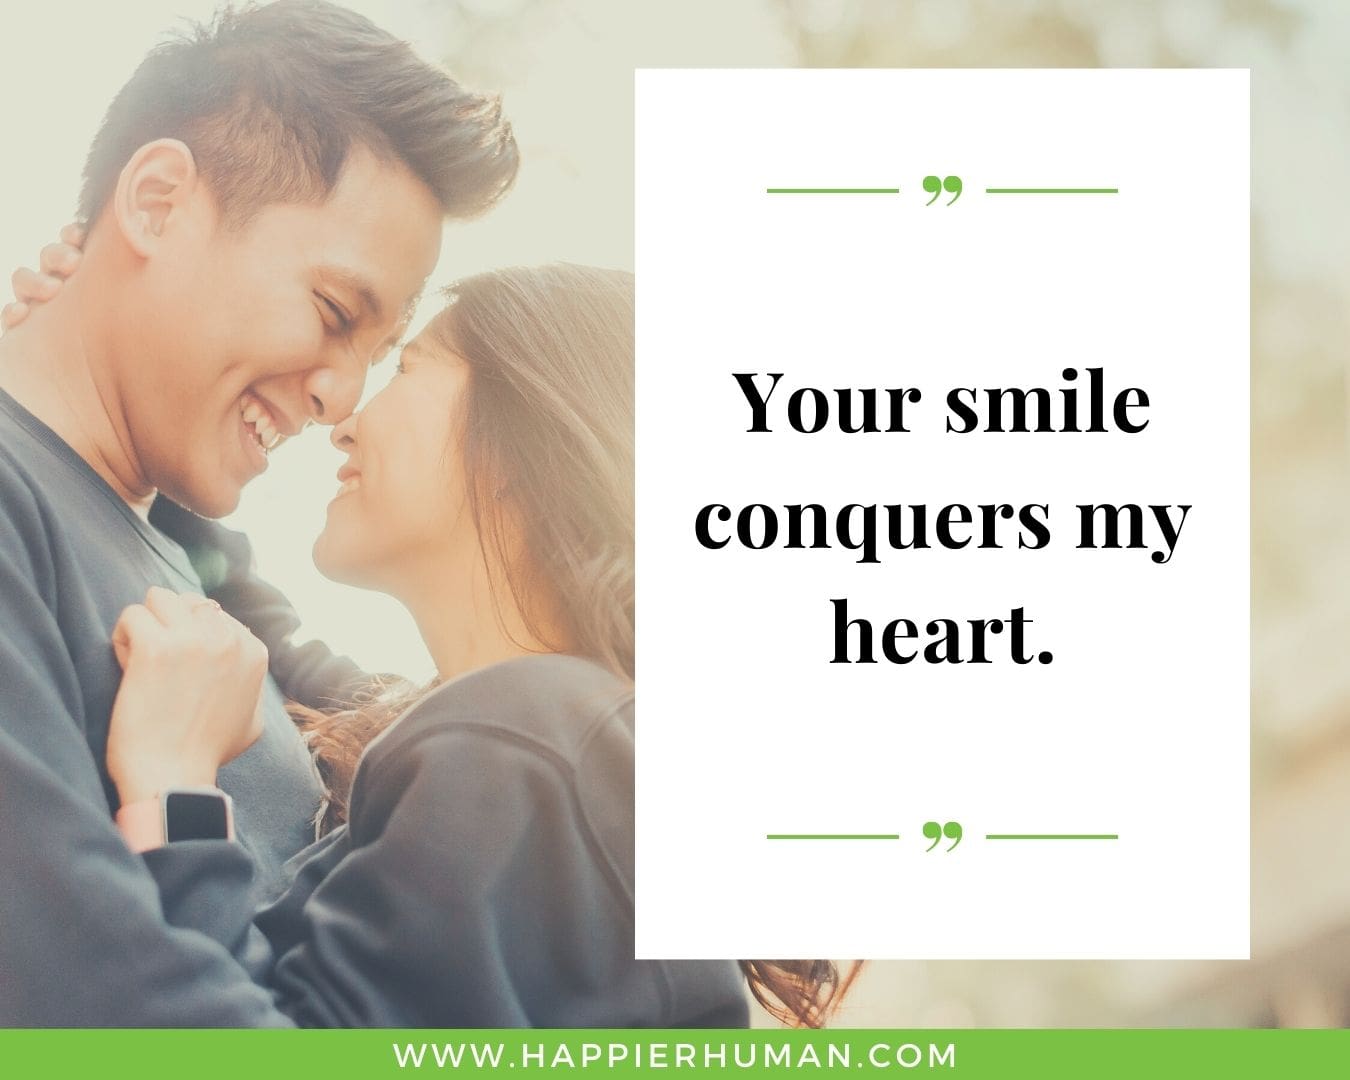 Smile and love quotes to make her heart flutter- “Your smile conquers my heart.”